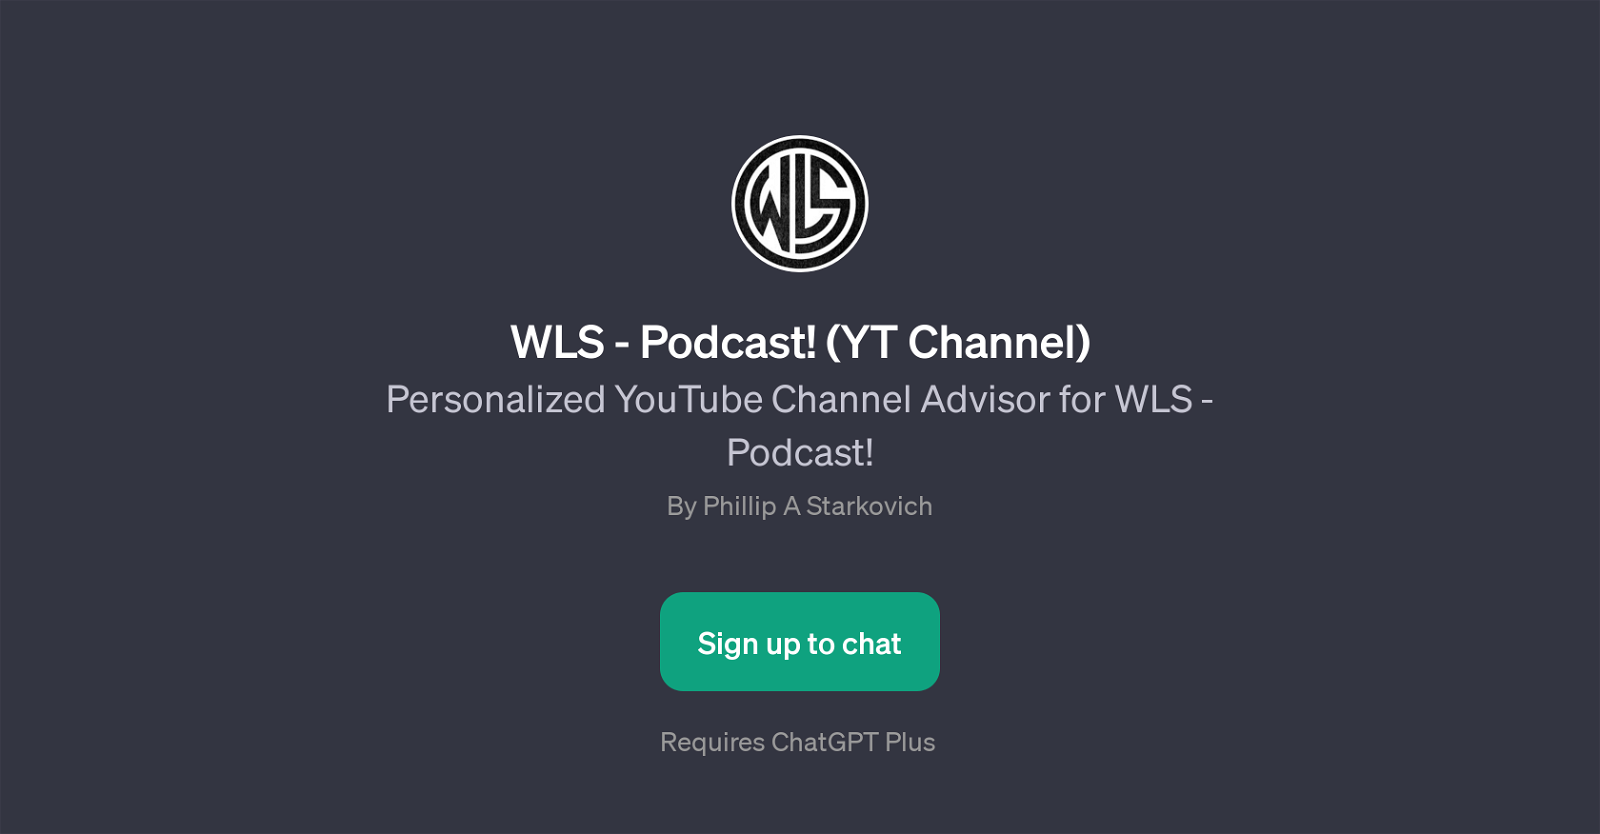 WLS - Podcast! (YT Channel) website